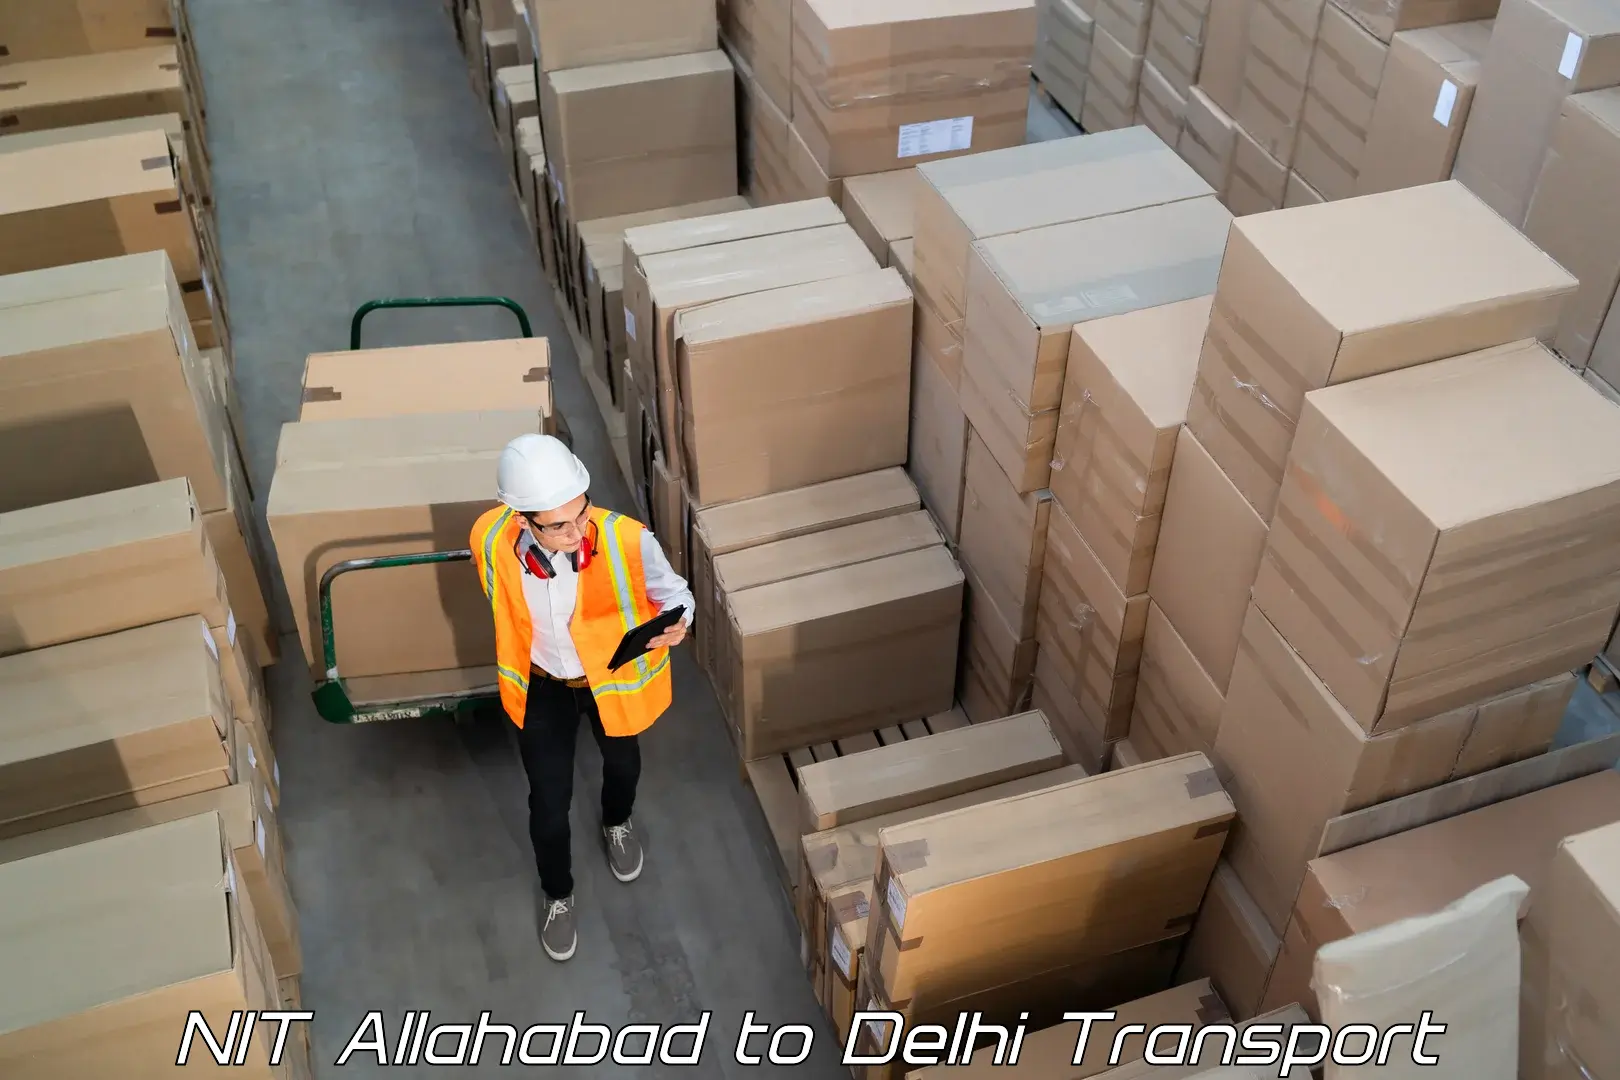 Vehicle transport services NIT Allahabad to Delhi